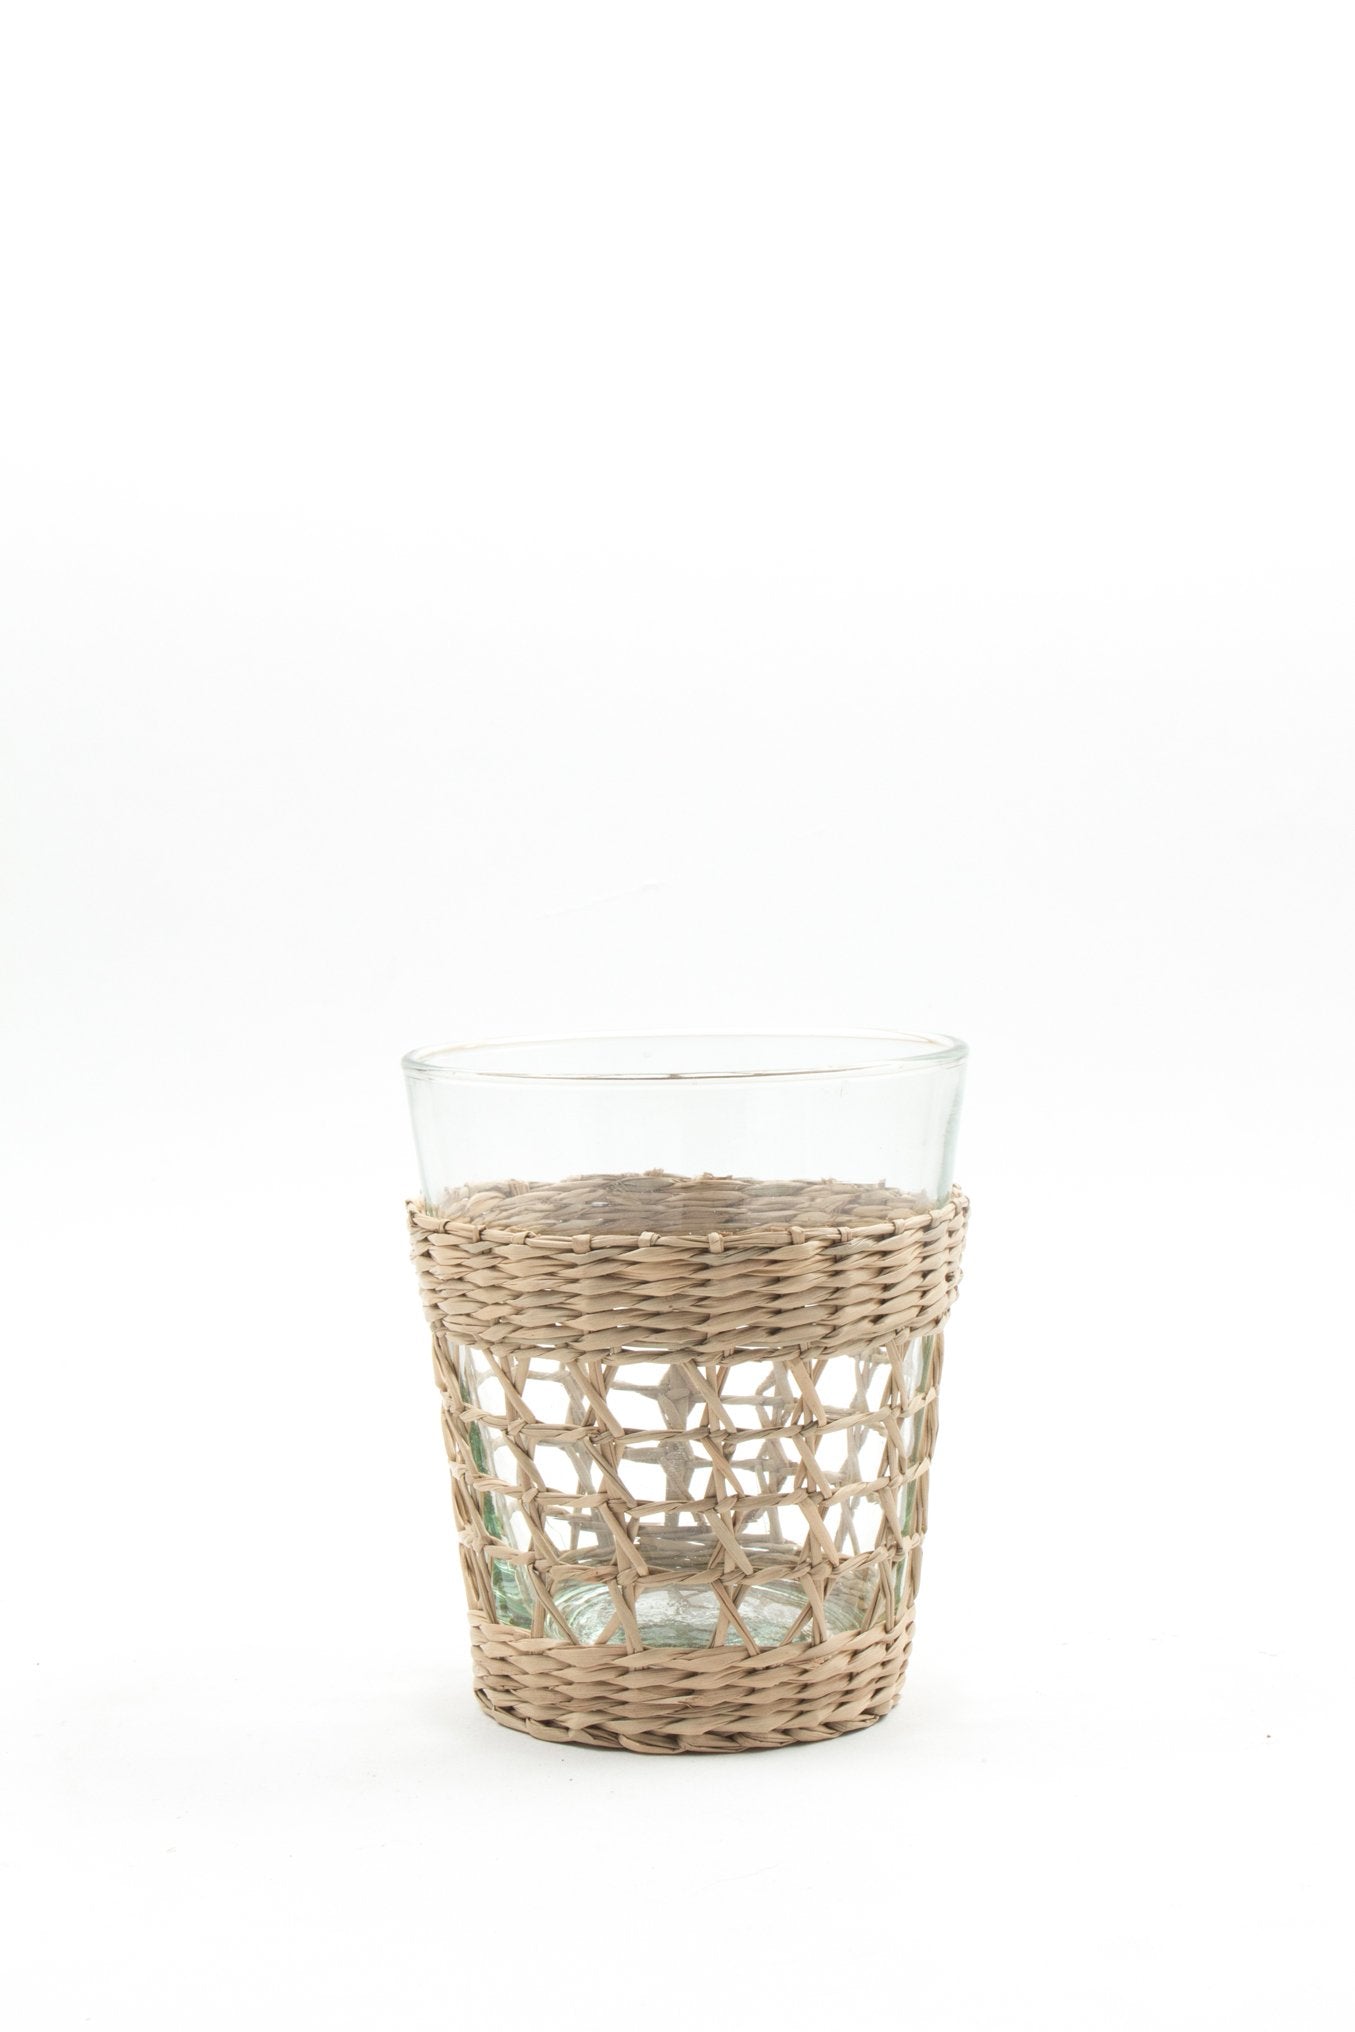 Seagrass Cage Wide Tumbler Glass Seagrass Brand_Seagrass & Rattan Champagne Flutes Cocktail Kitchen_Drinkware SeagrassCageTumbler